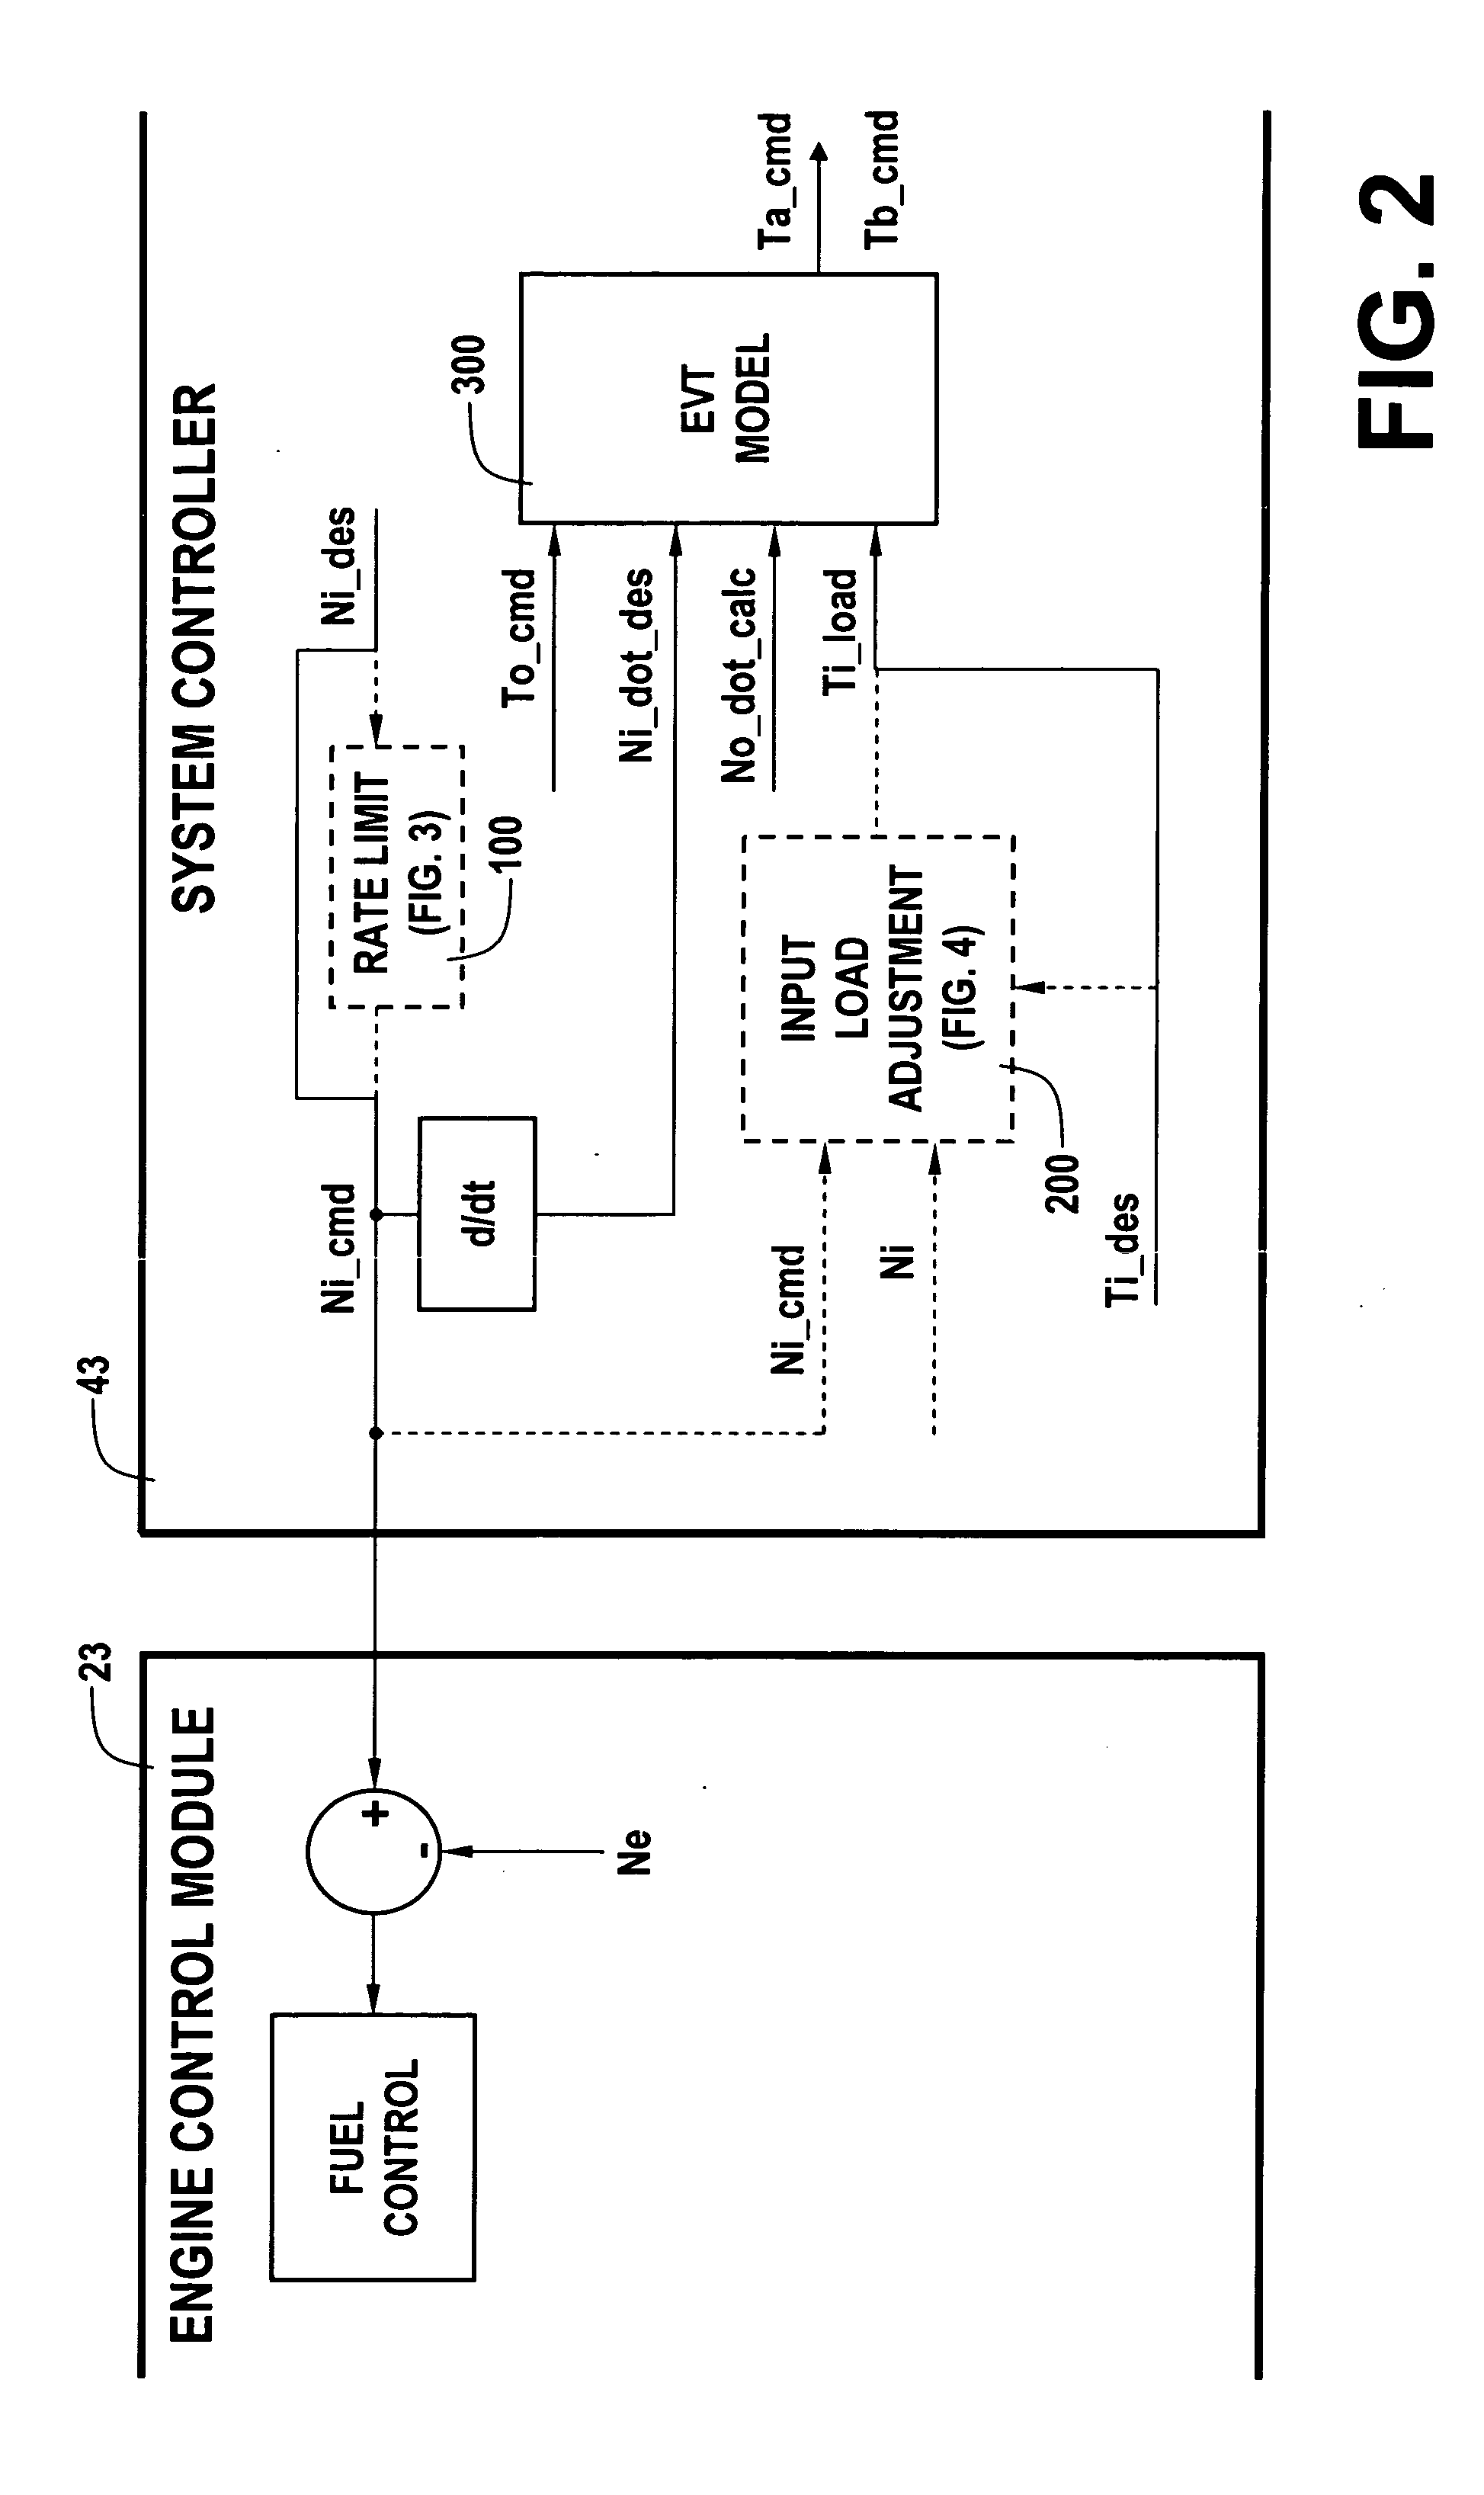 Single motor recovery for an electrically variable transmission